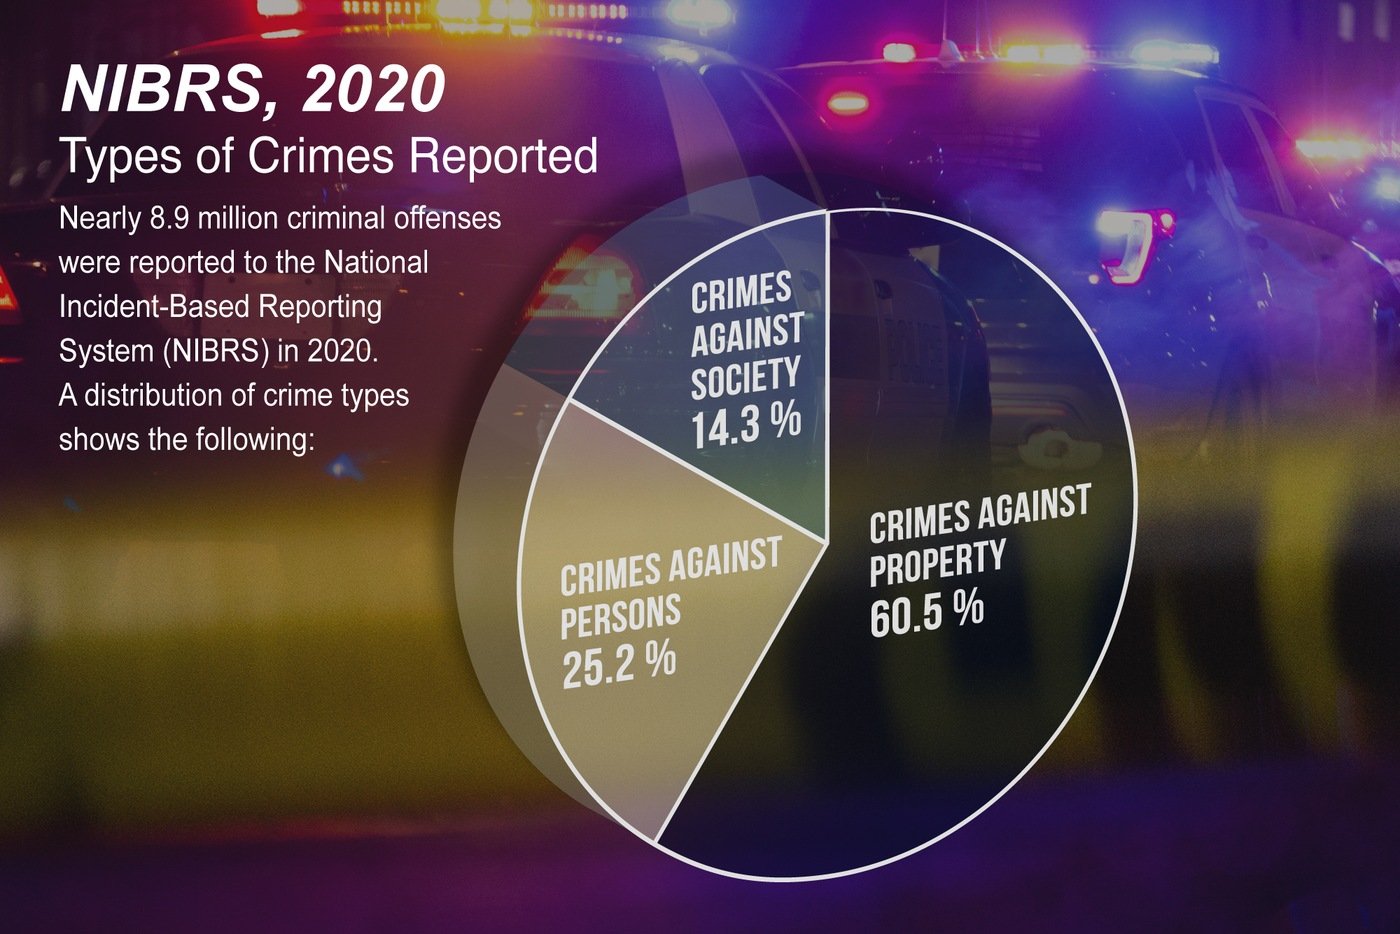 Pie chart showing the breakdown of types of crimes reported in the NIBRS, 2020 report.